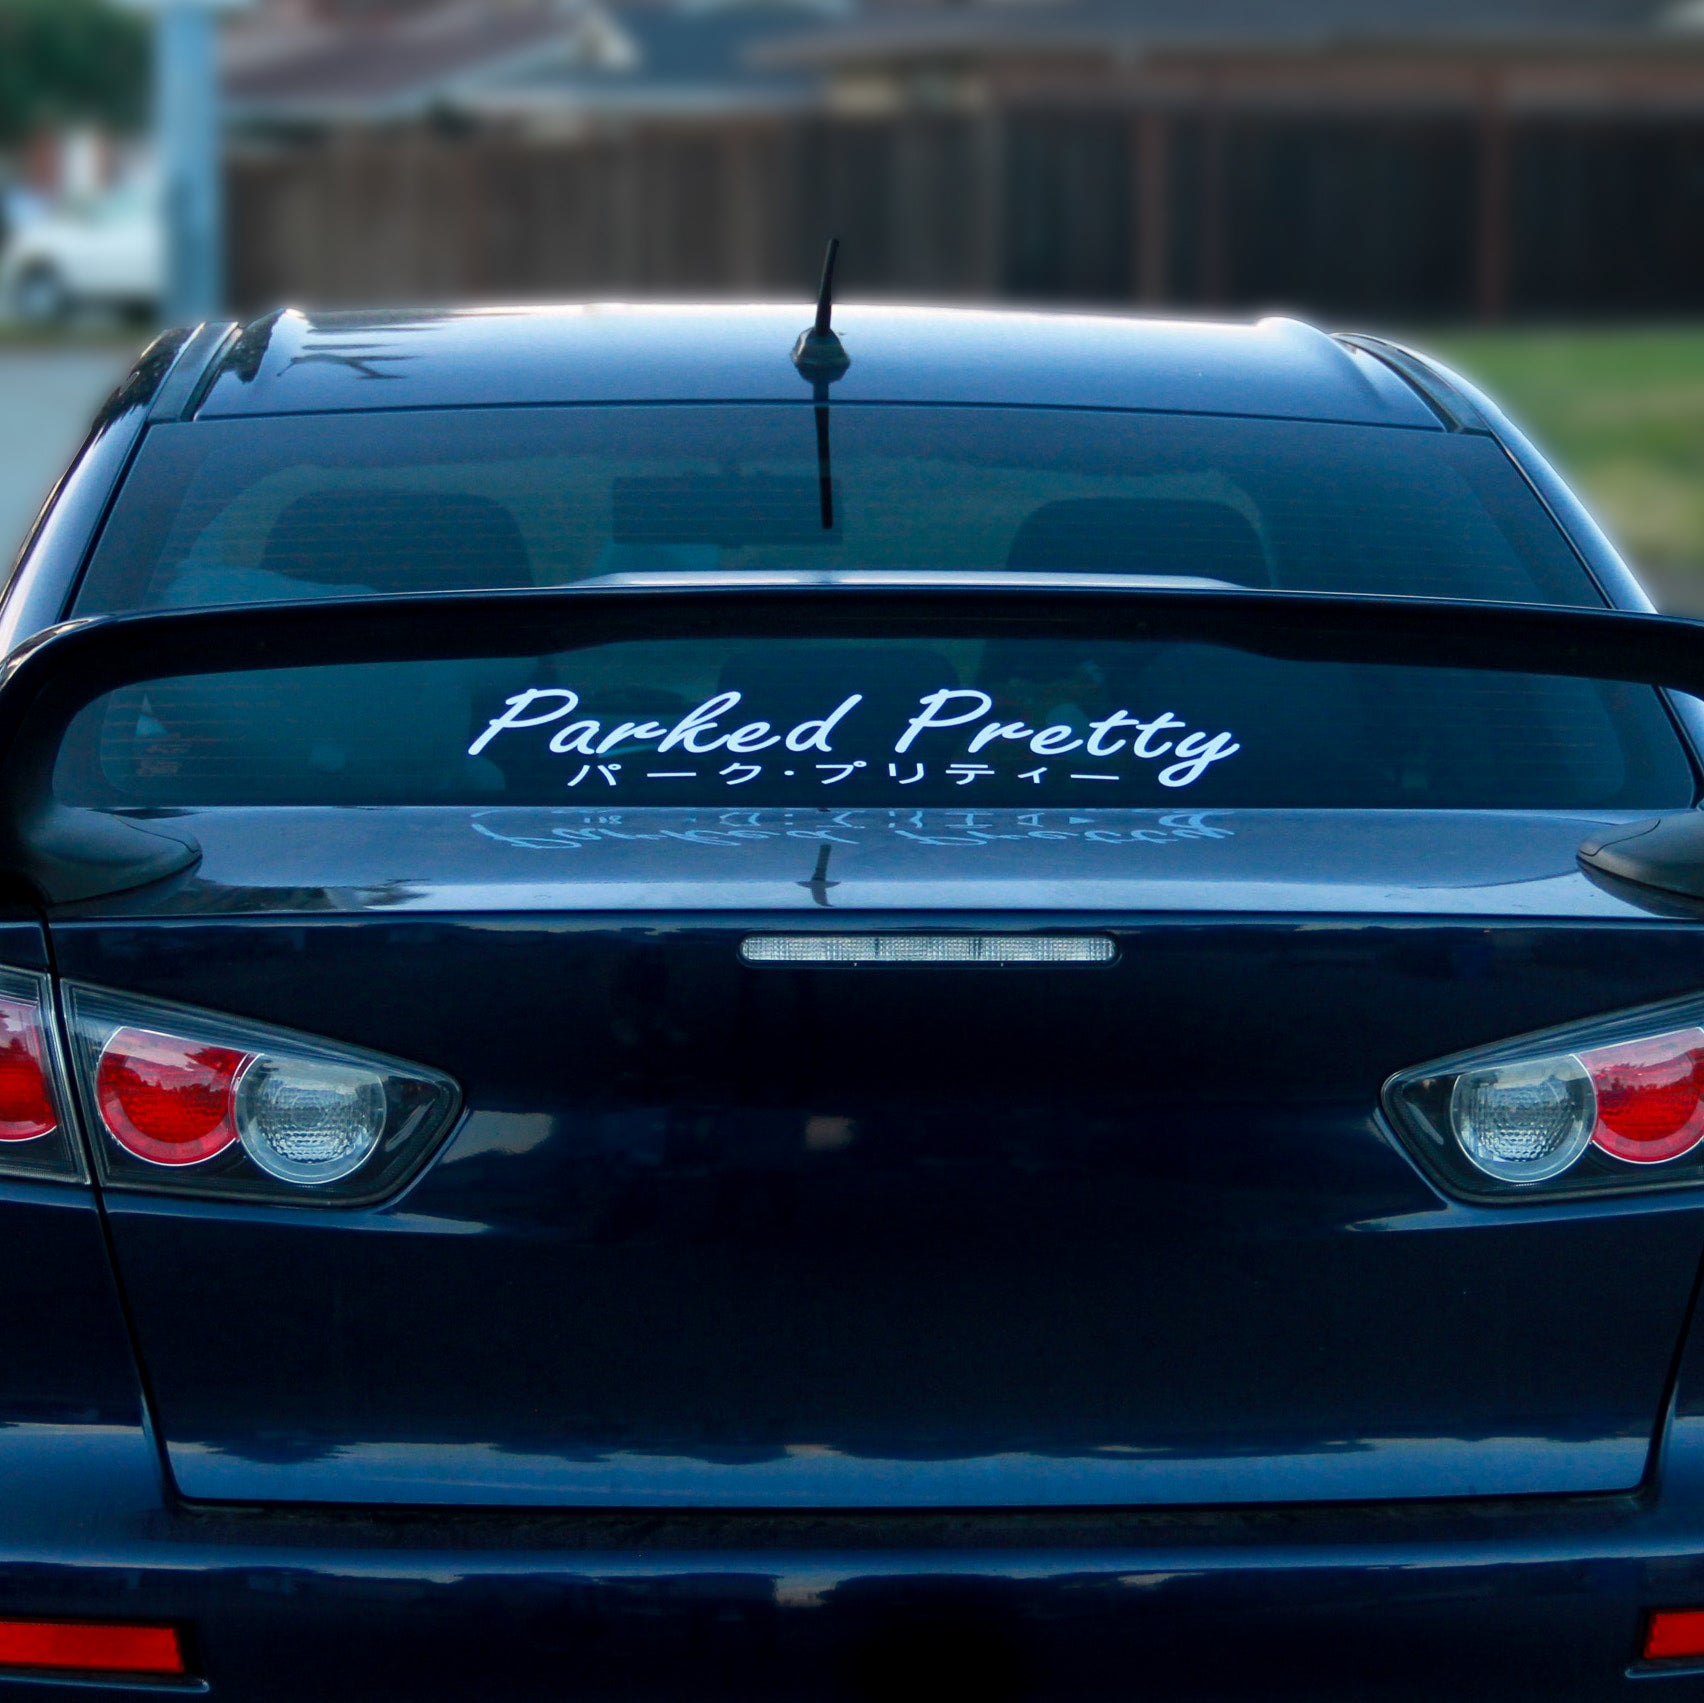 parked pretty jdm banner decal